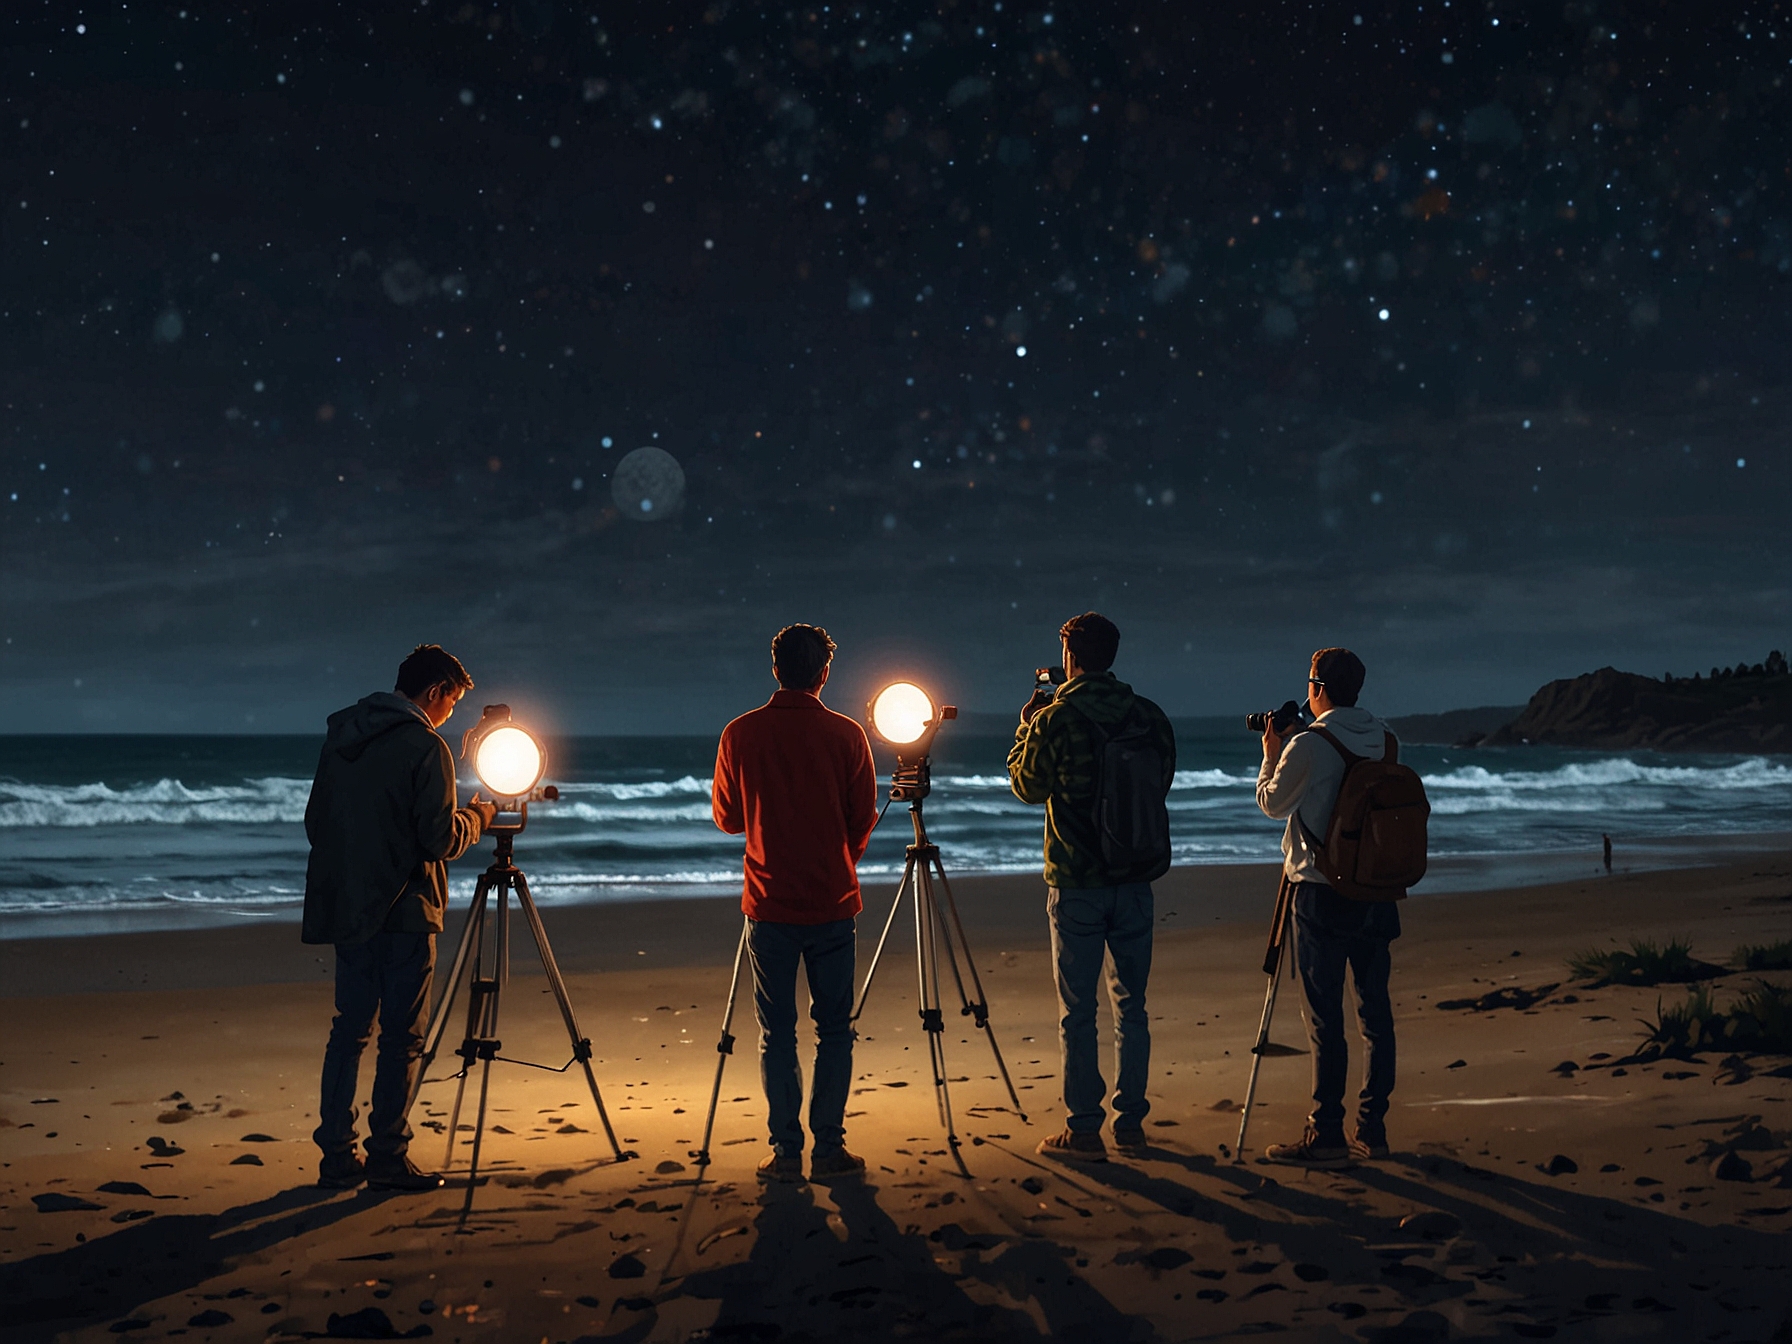 Observers equipped with telescopes at a remote beach, away from city lights, marvel at the bright celestial display of the Strawberry Solstice Moon and aligned planets.